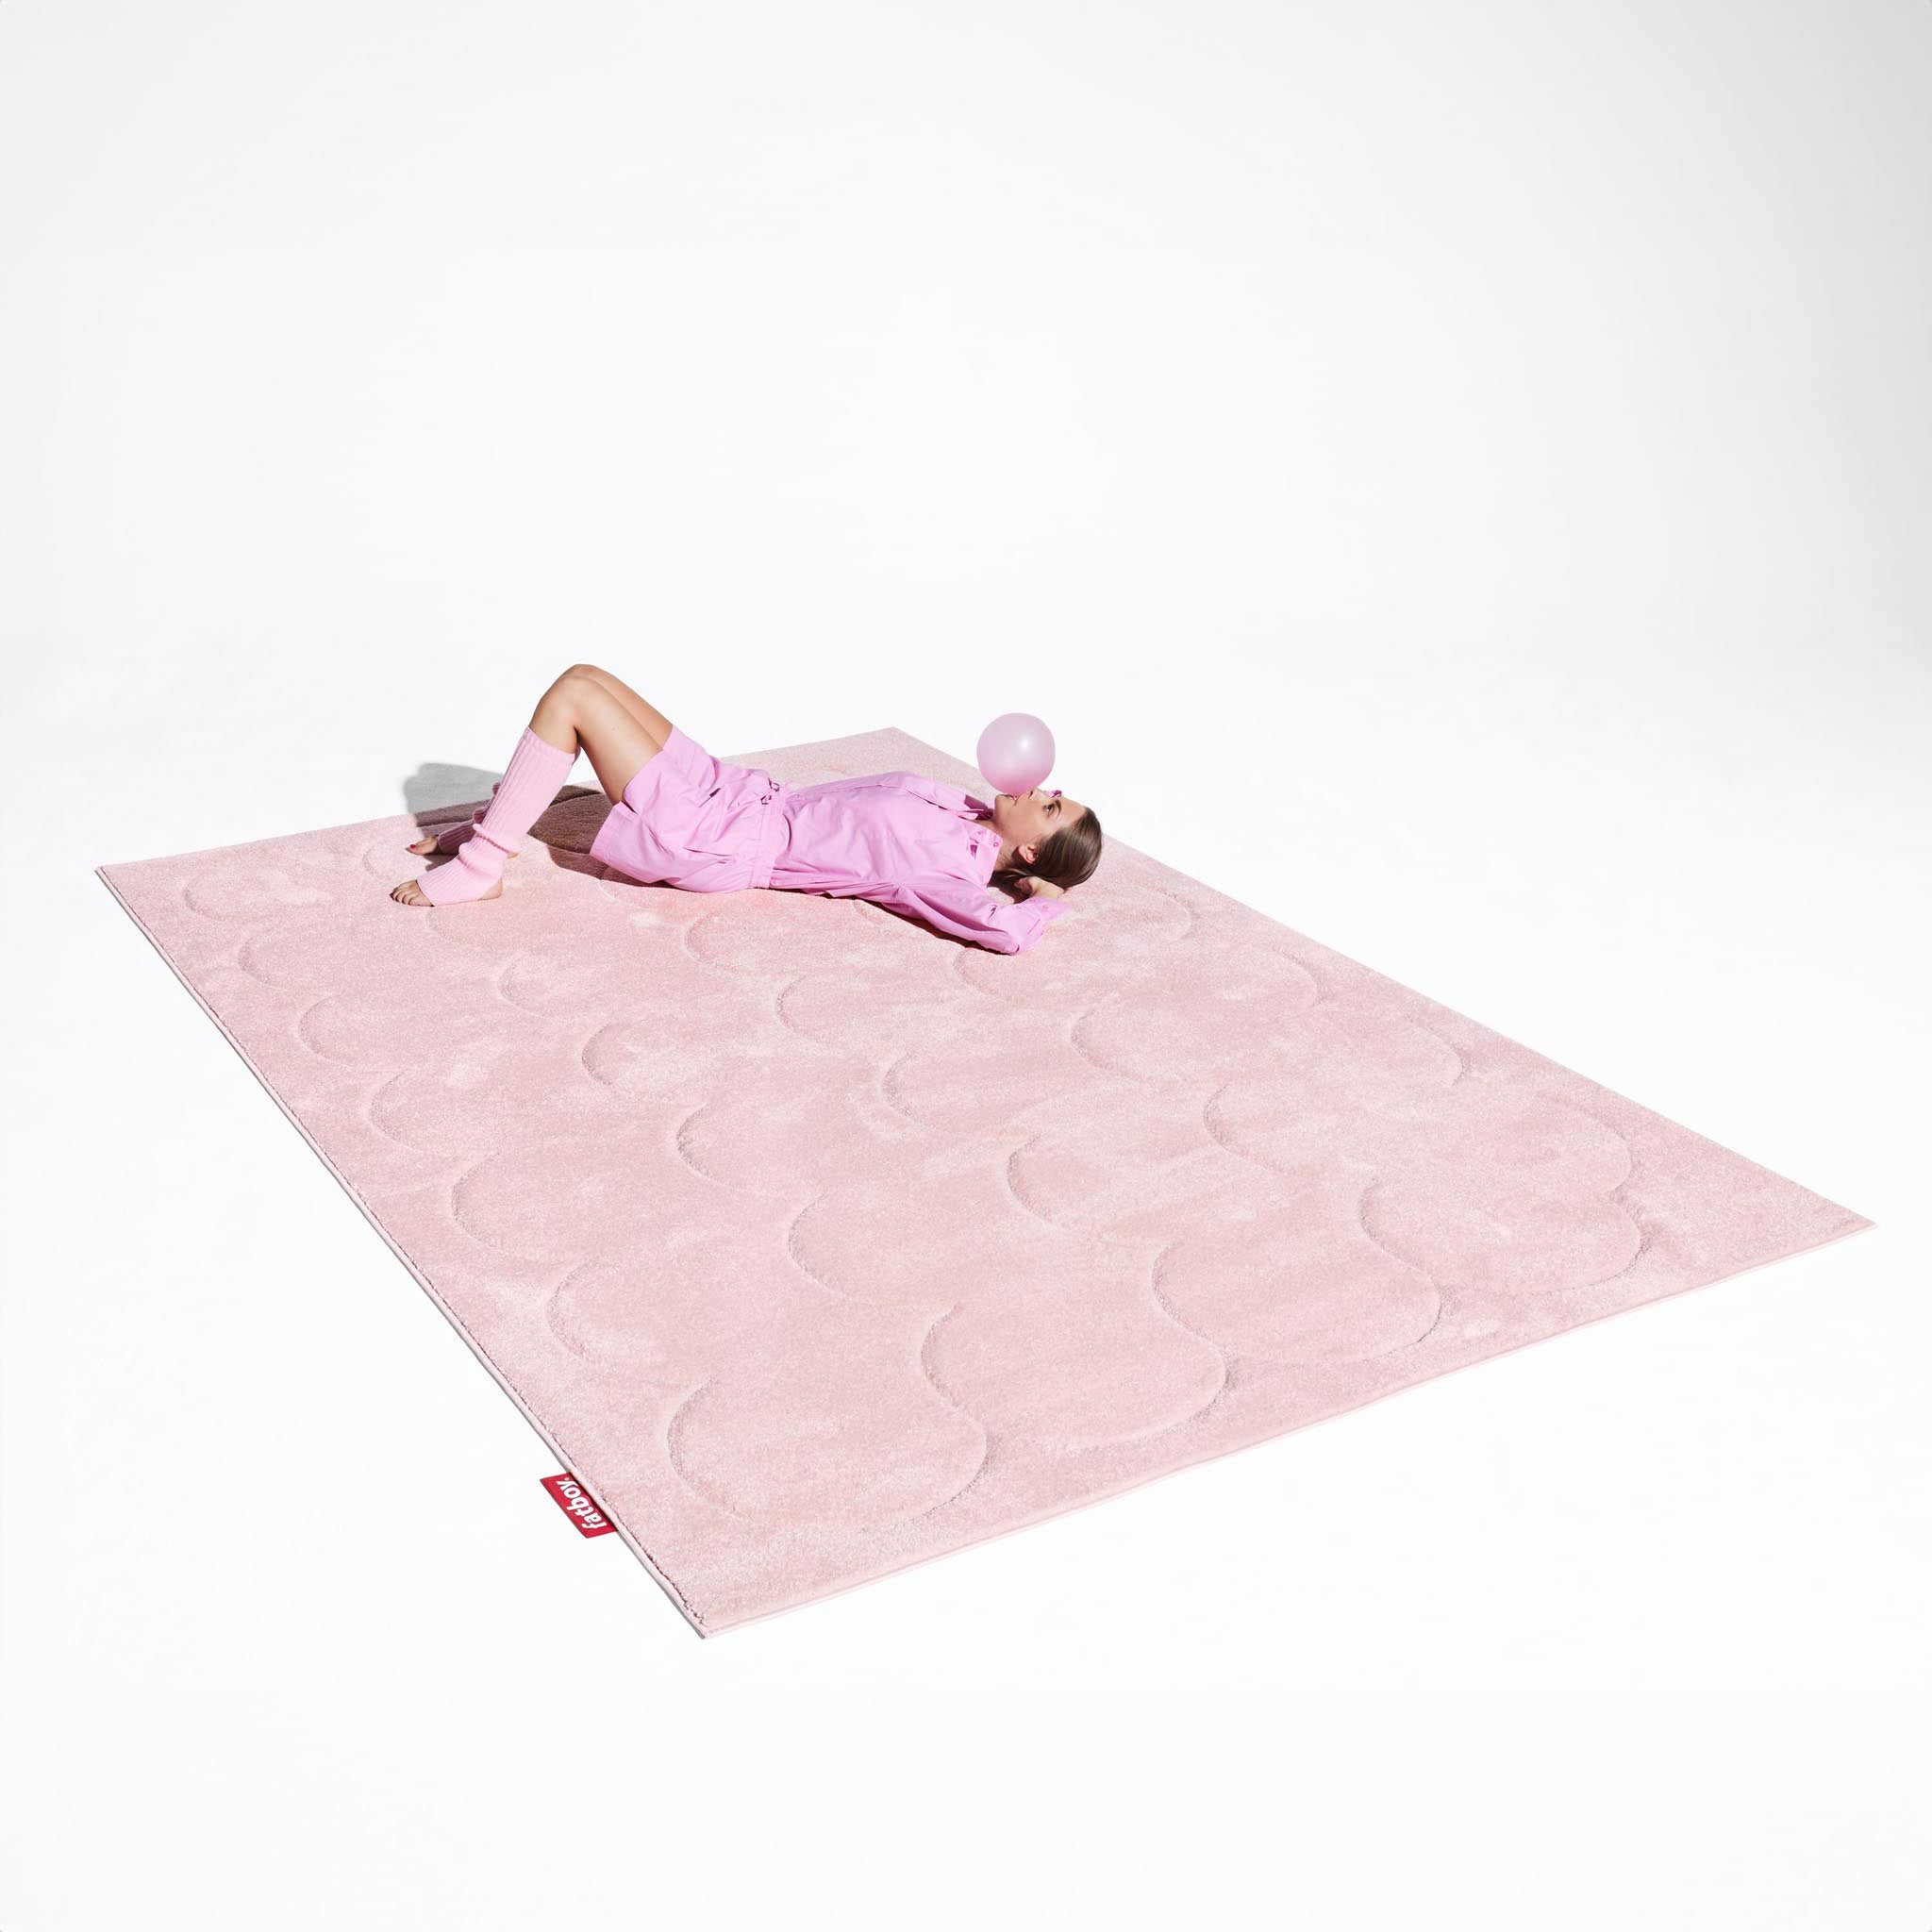 Fatboy Bubble Carpet in playful pattern, perfect for bedroom or living area, 200x290 cm.